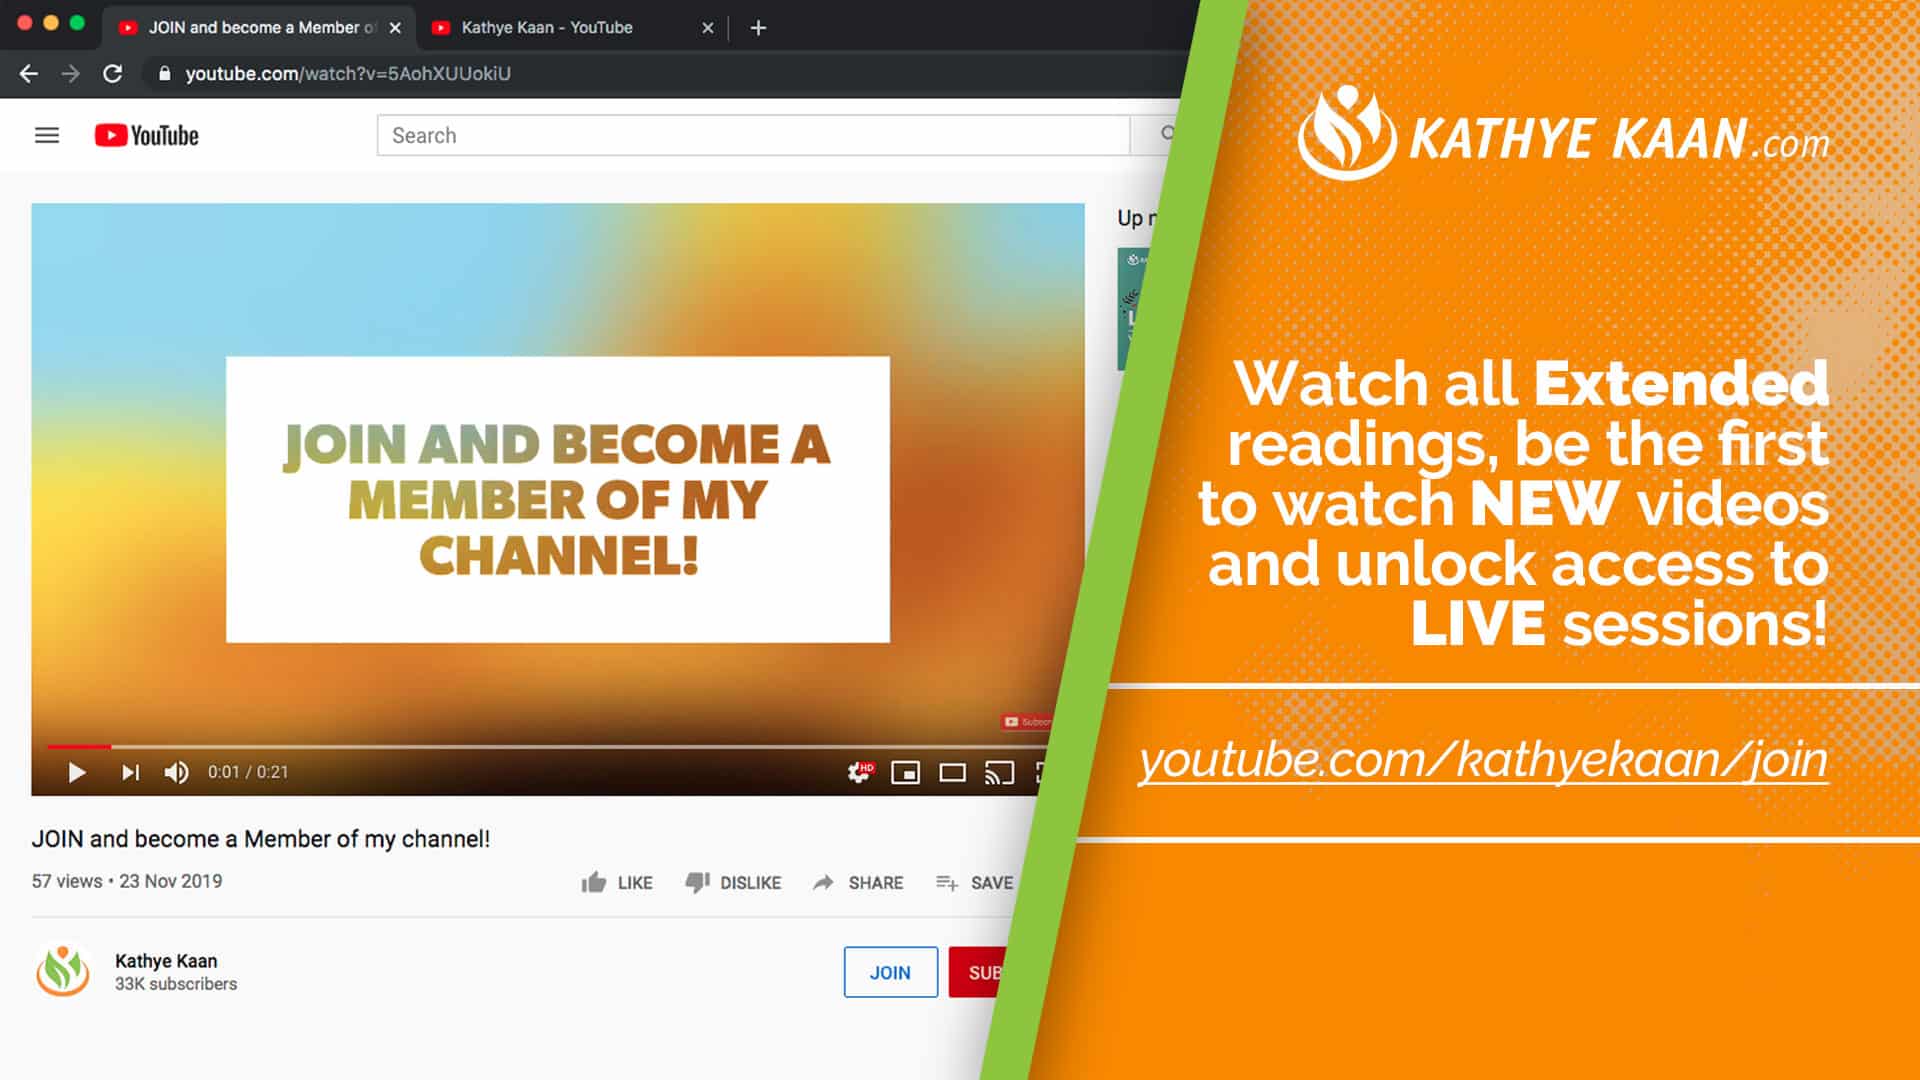 Join My YouTube Channel and Become a Member to watch Extended readings and unlock access to LIVE sessions